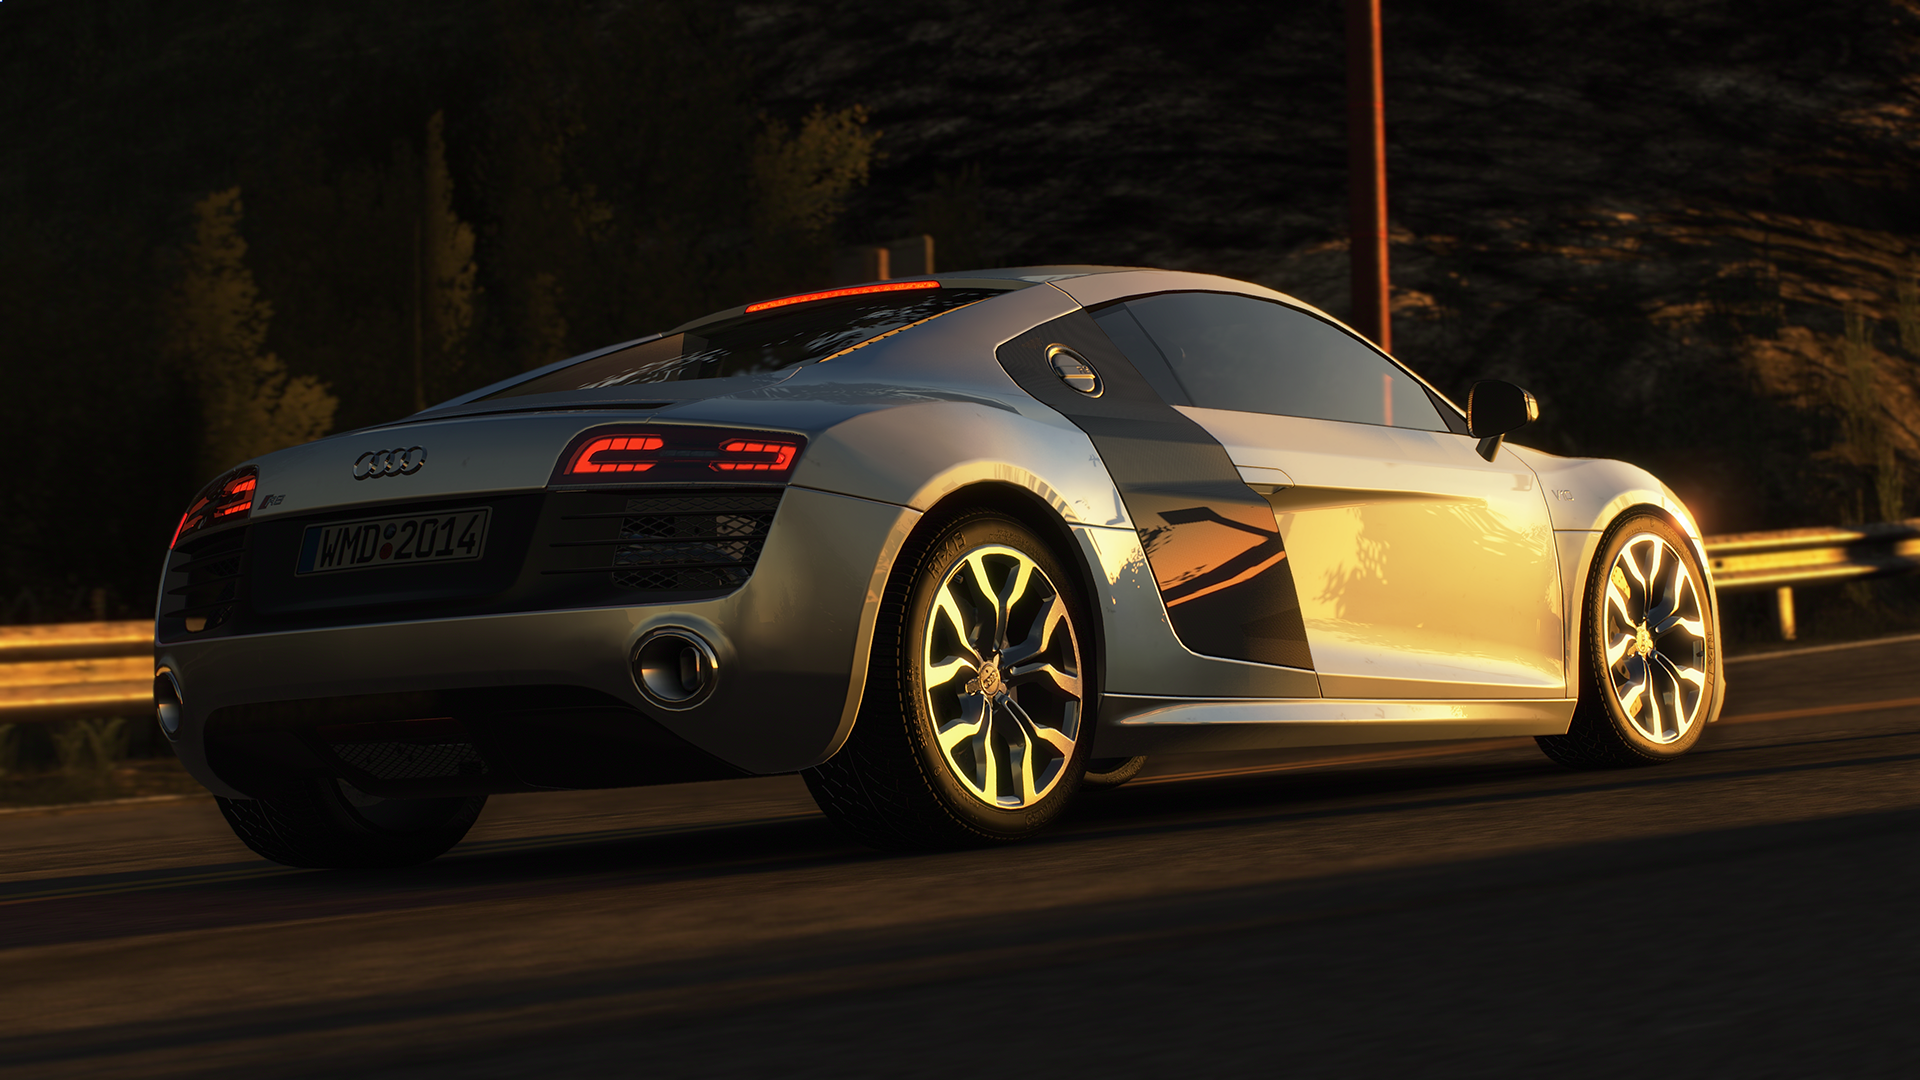 pcars_exe_dx11_20140330_044134_by_roderickartist-d7c6kzw.png